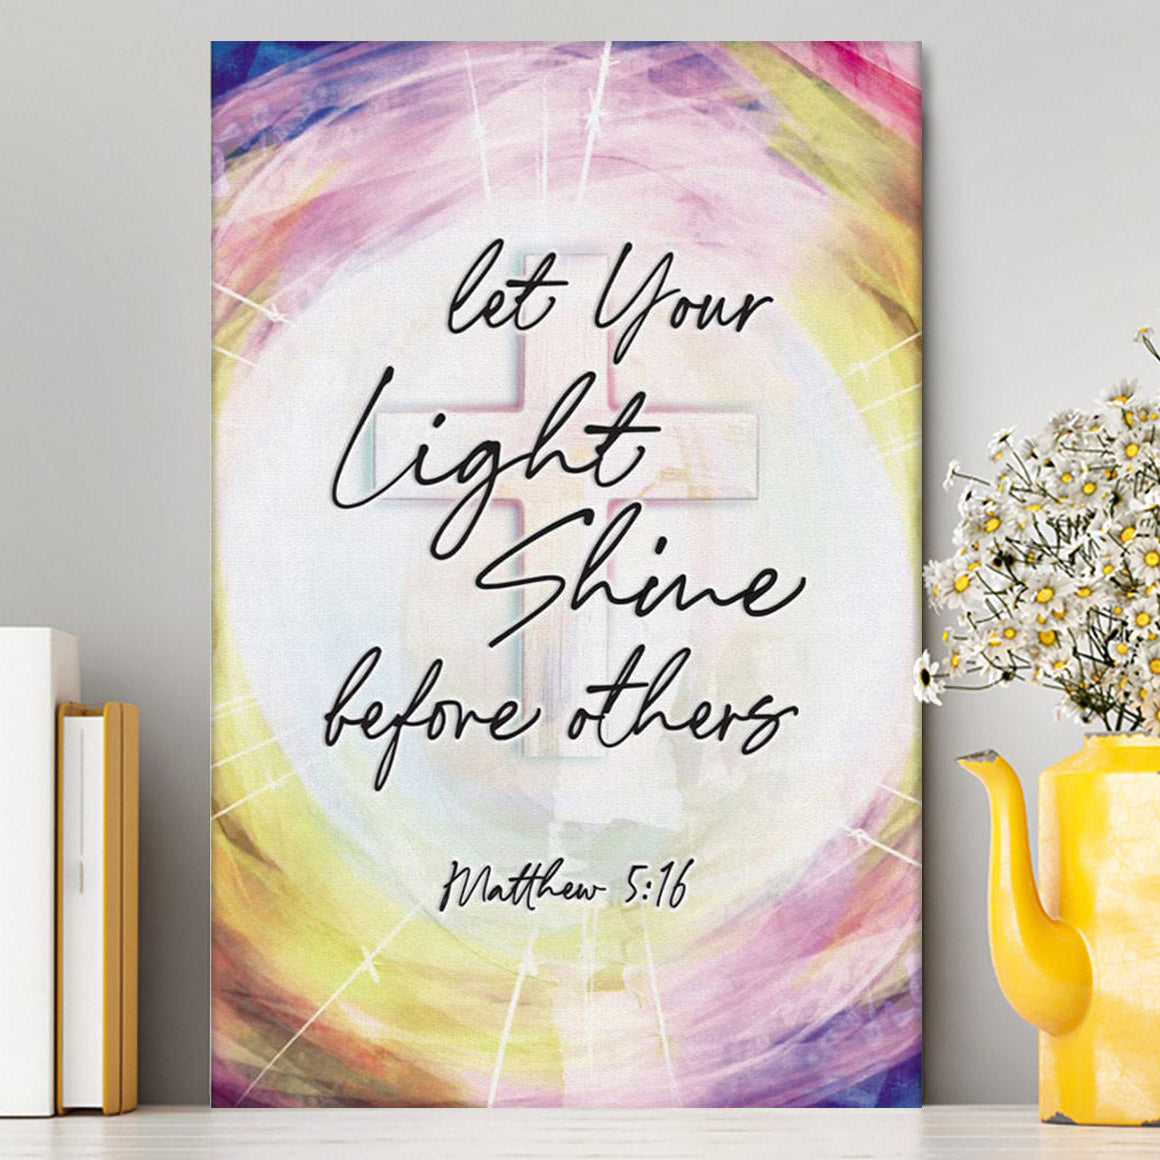 Matthew 516 Let Your Light Shine Before Others Canvas Wall Art - Christian Canvas Prints - Religious Wall Decor